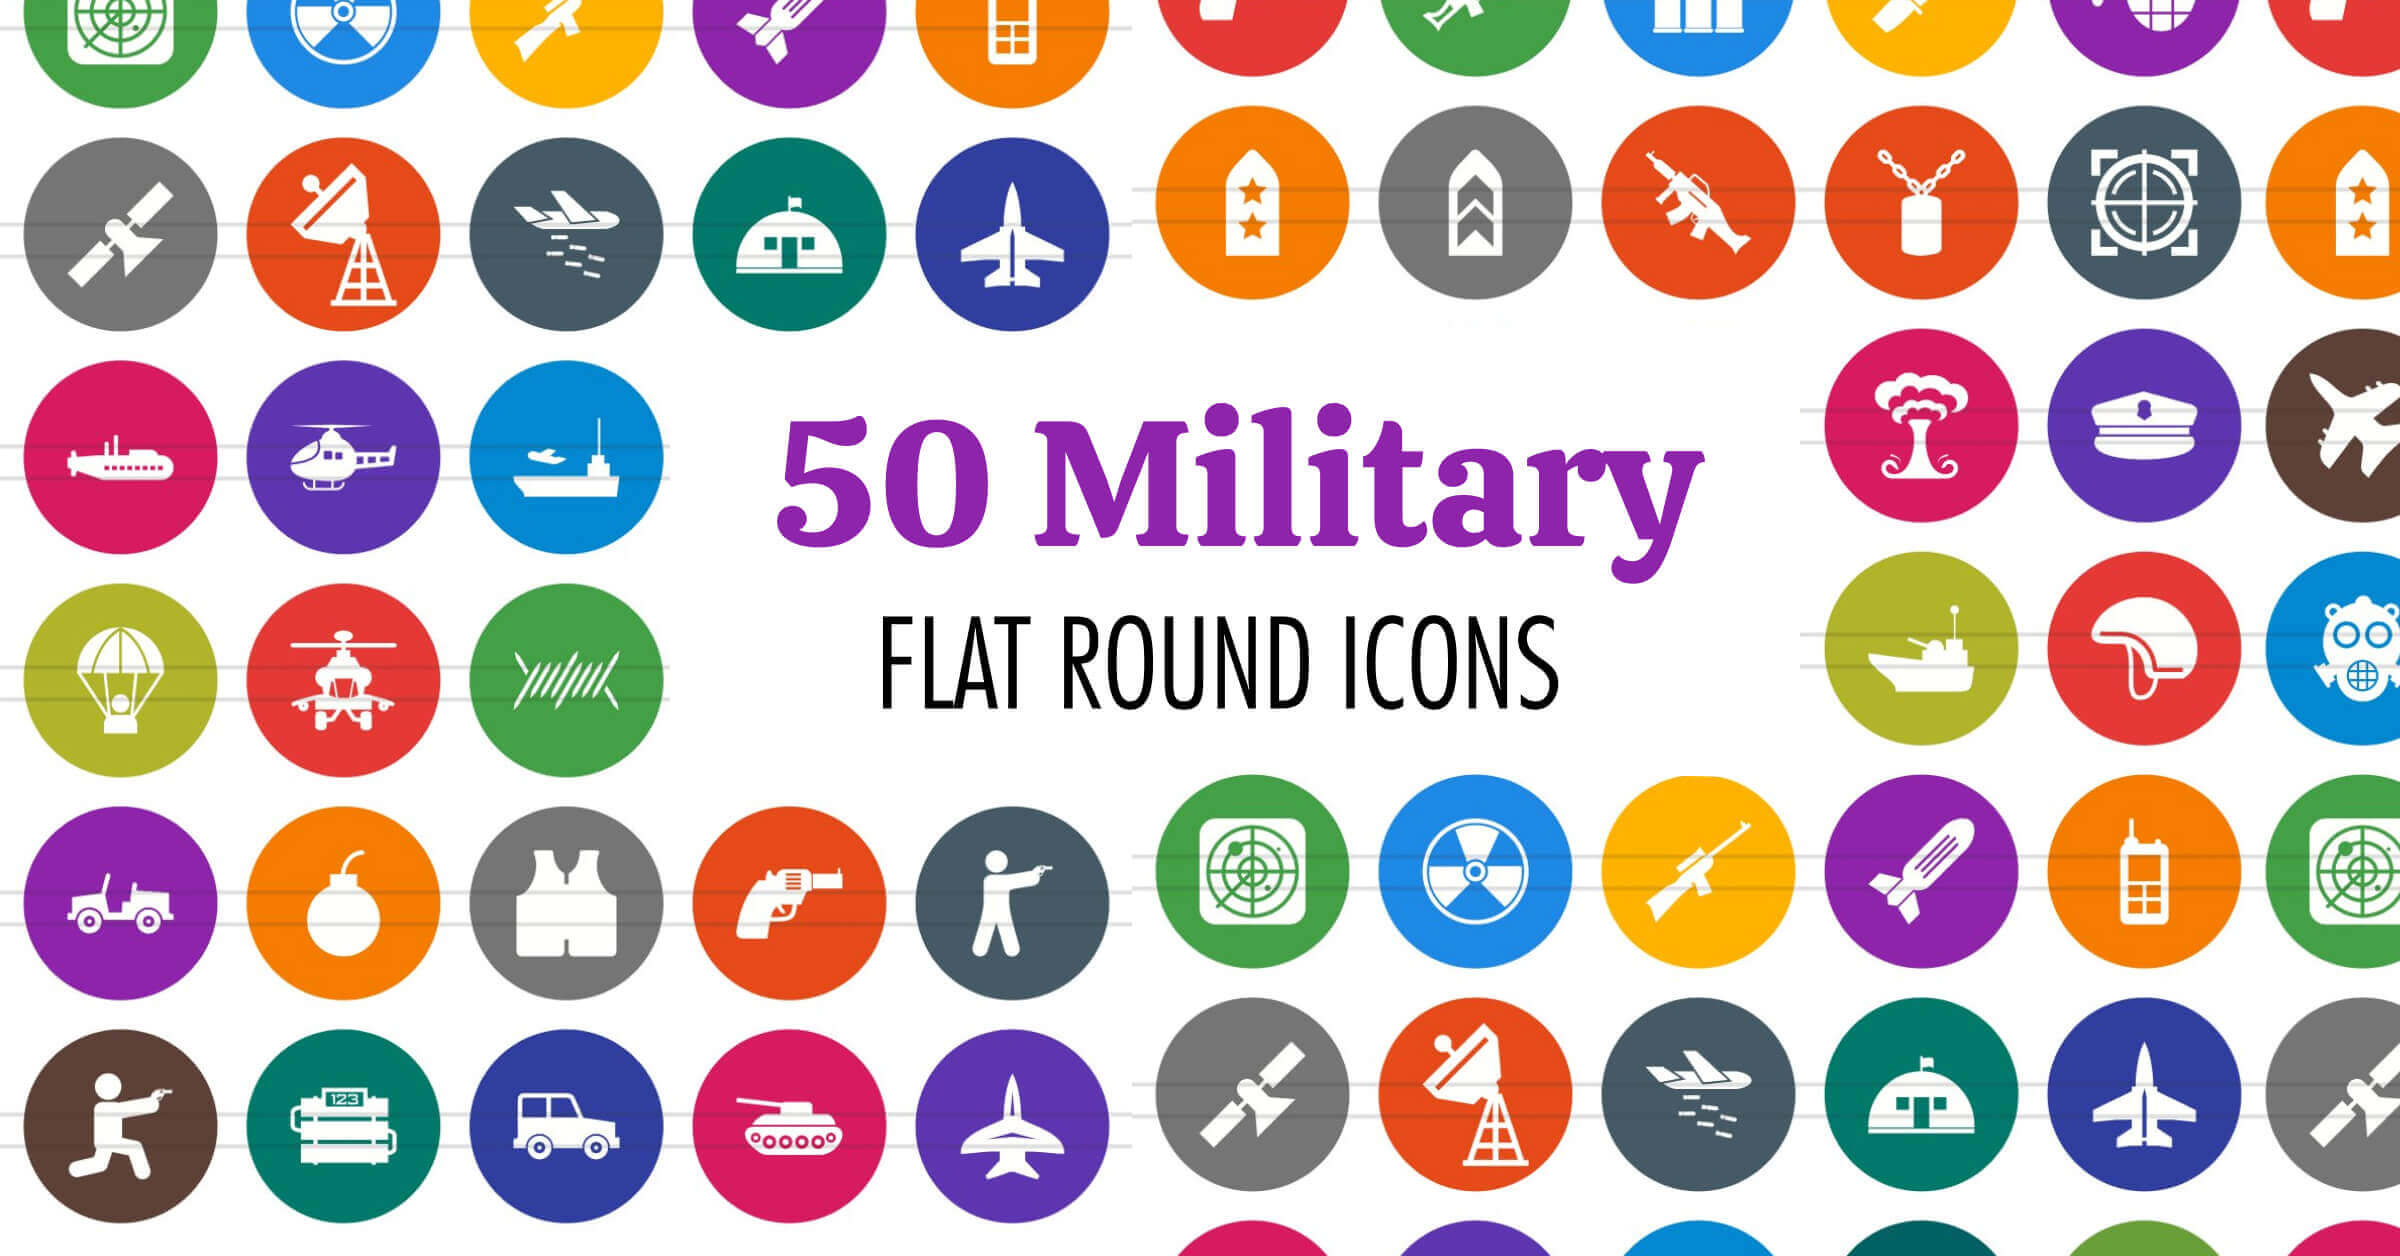 50 round icons depicting military objects.